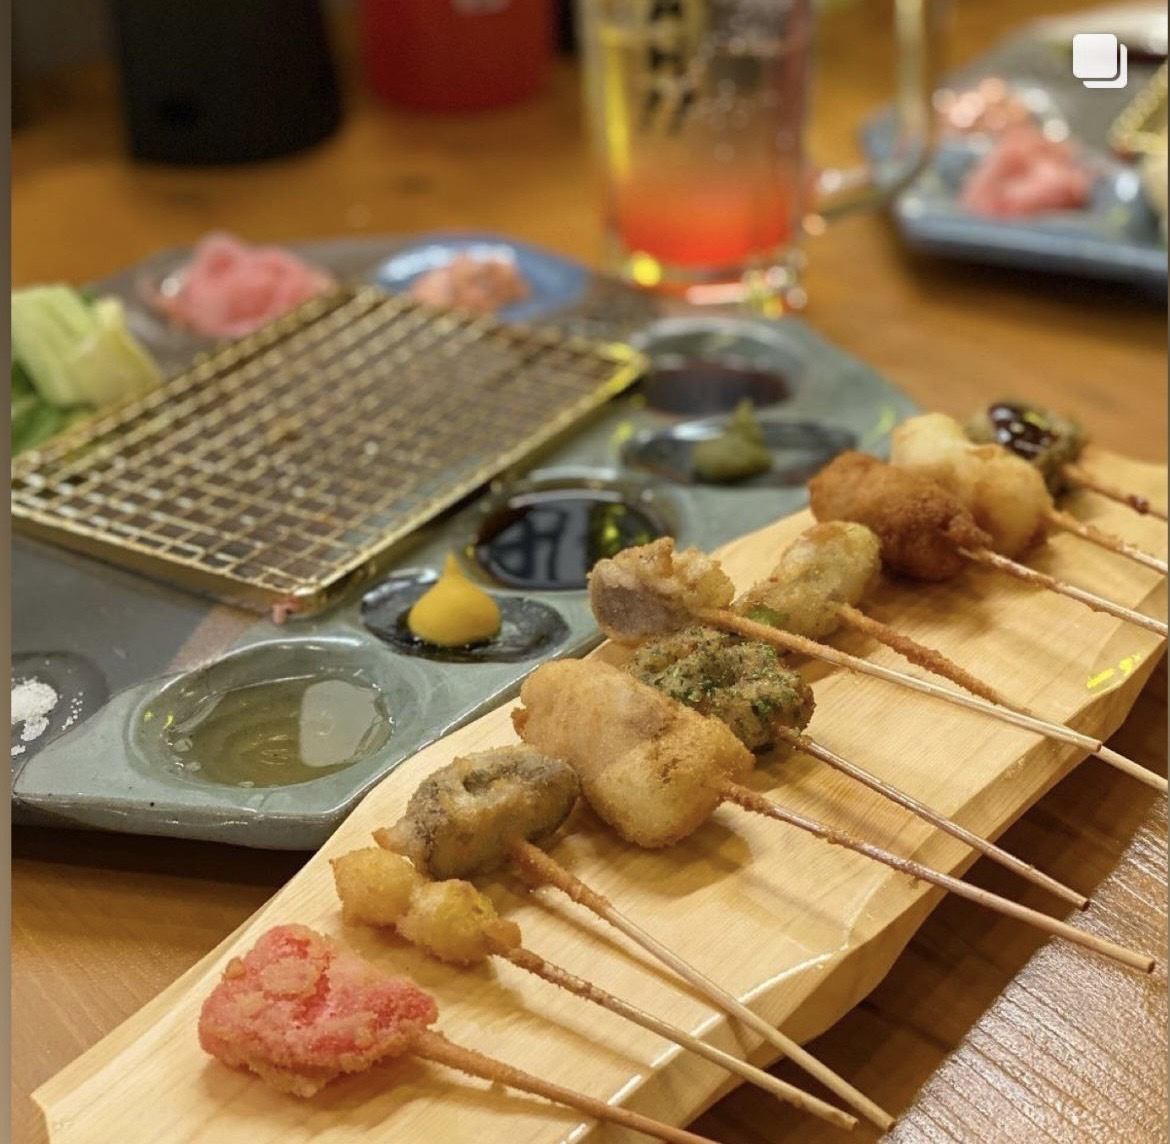 You can enjoy Kyoto-style deep-fried skewers in an Instagram-worthy interior♪